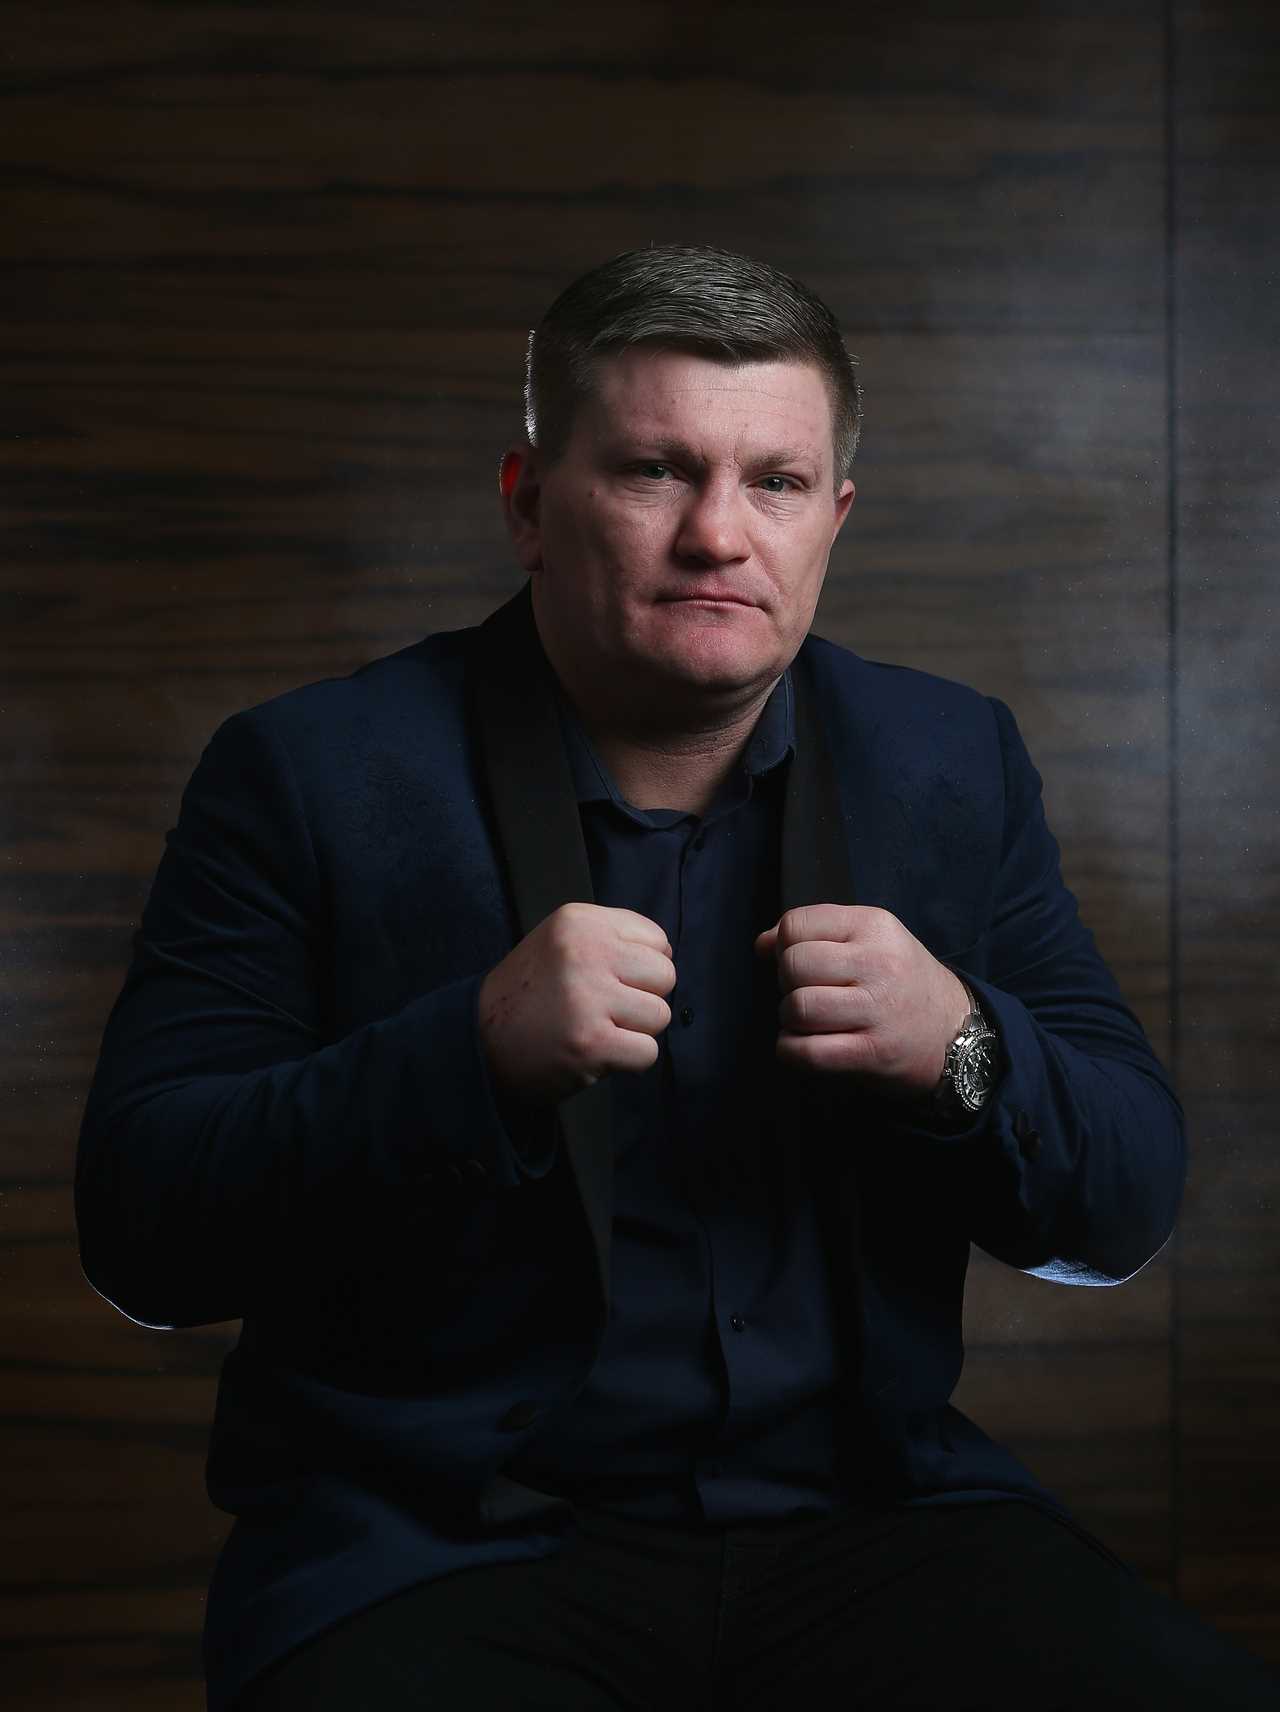 Ricky Hatton shares secrets to amazing transformations in seven weeks, including reducing the number of cupspas per day by half.